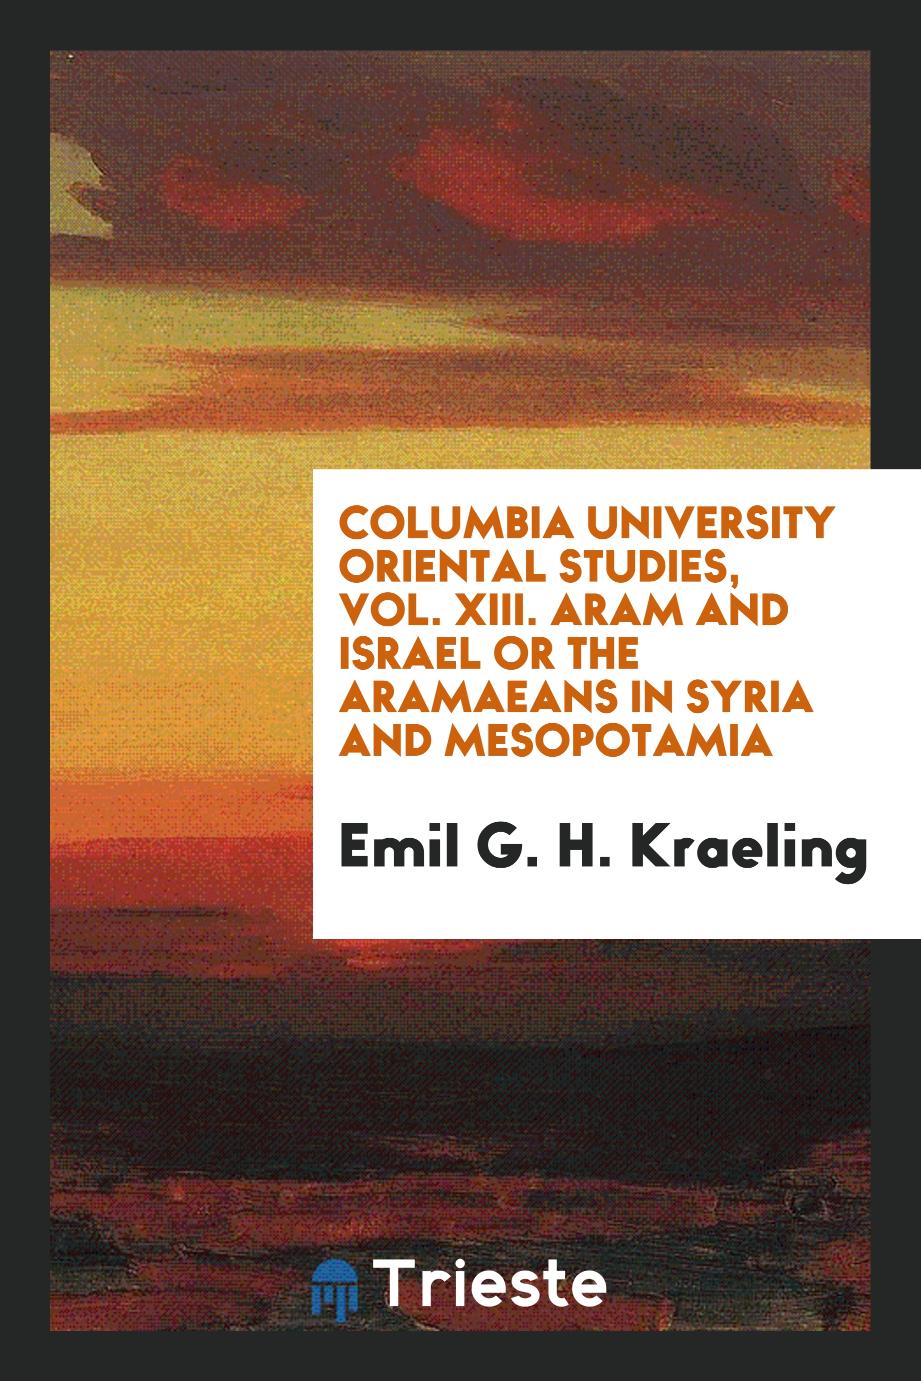 Columbia University Oriental Studies, Vol. XIII. Aram and Israel or the Aramaeans in Syria and Mesopotamia